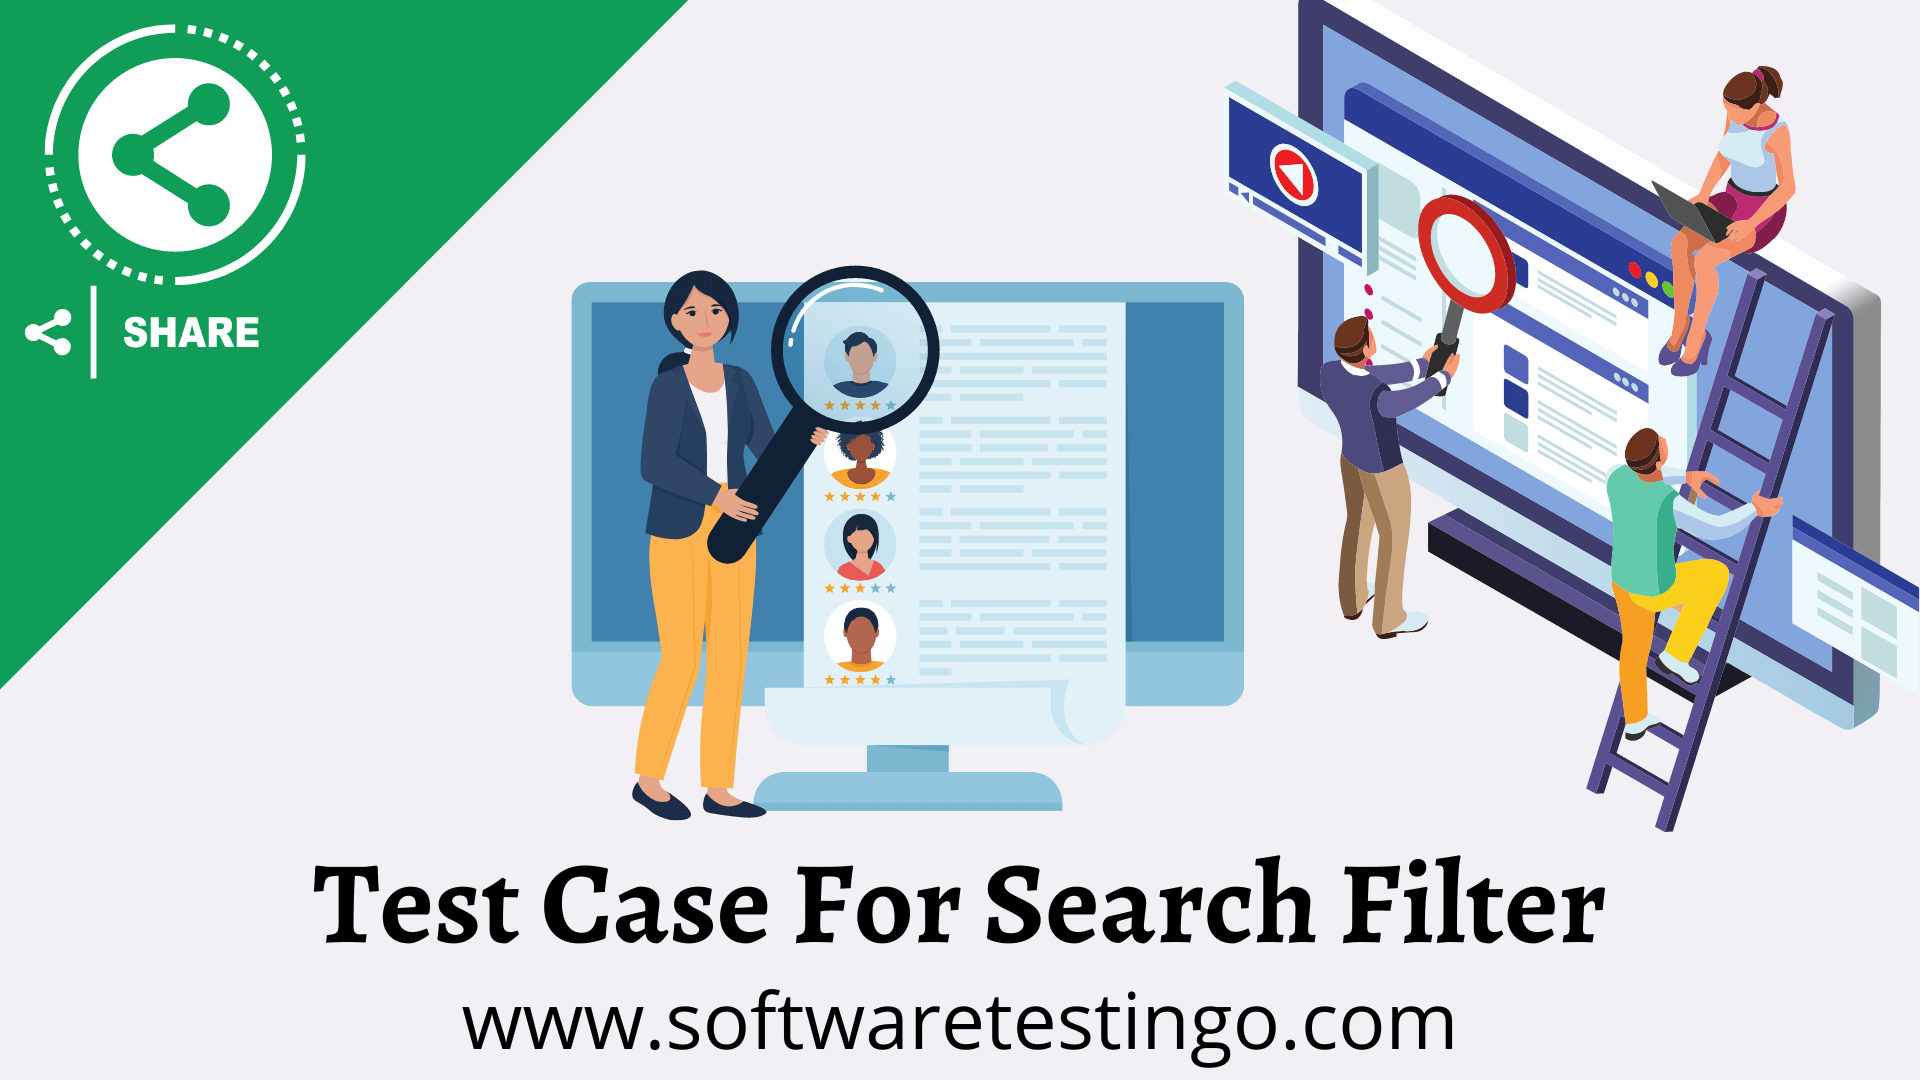 Test Case For Search Filter